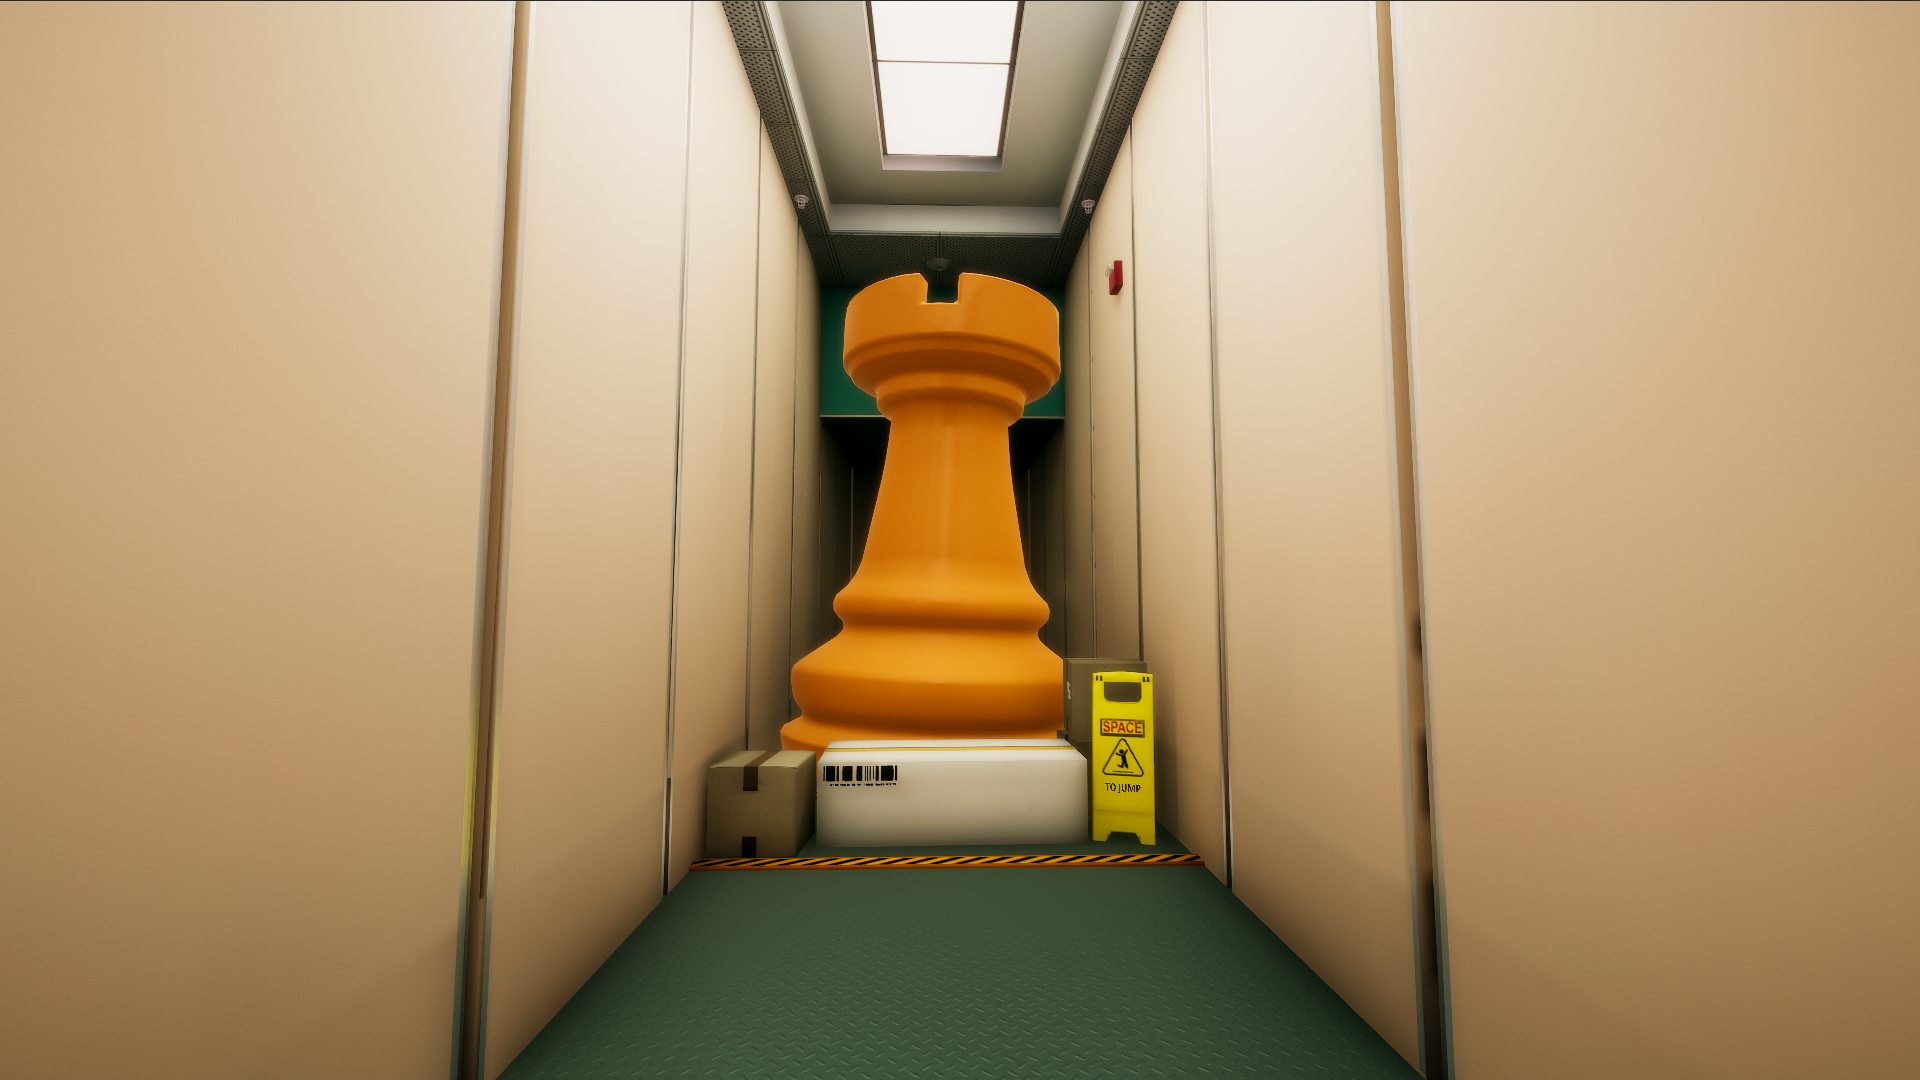 General 1920x1080 Superliminal screen shot colorful chess hallway video games